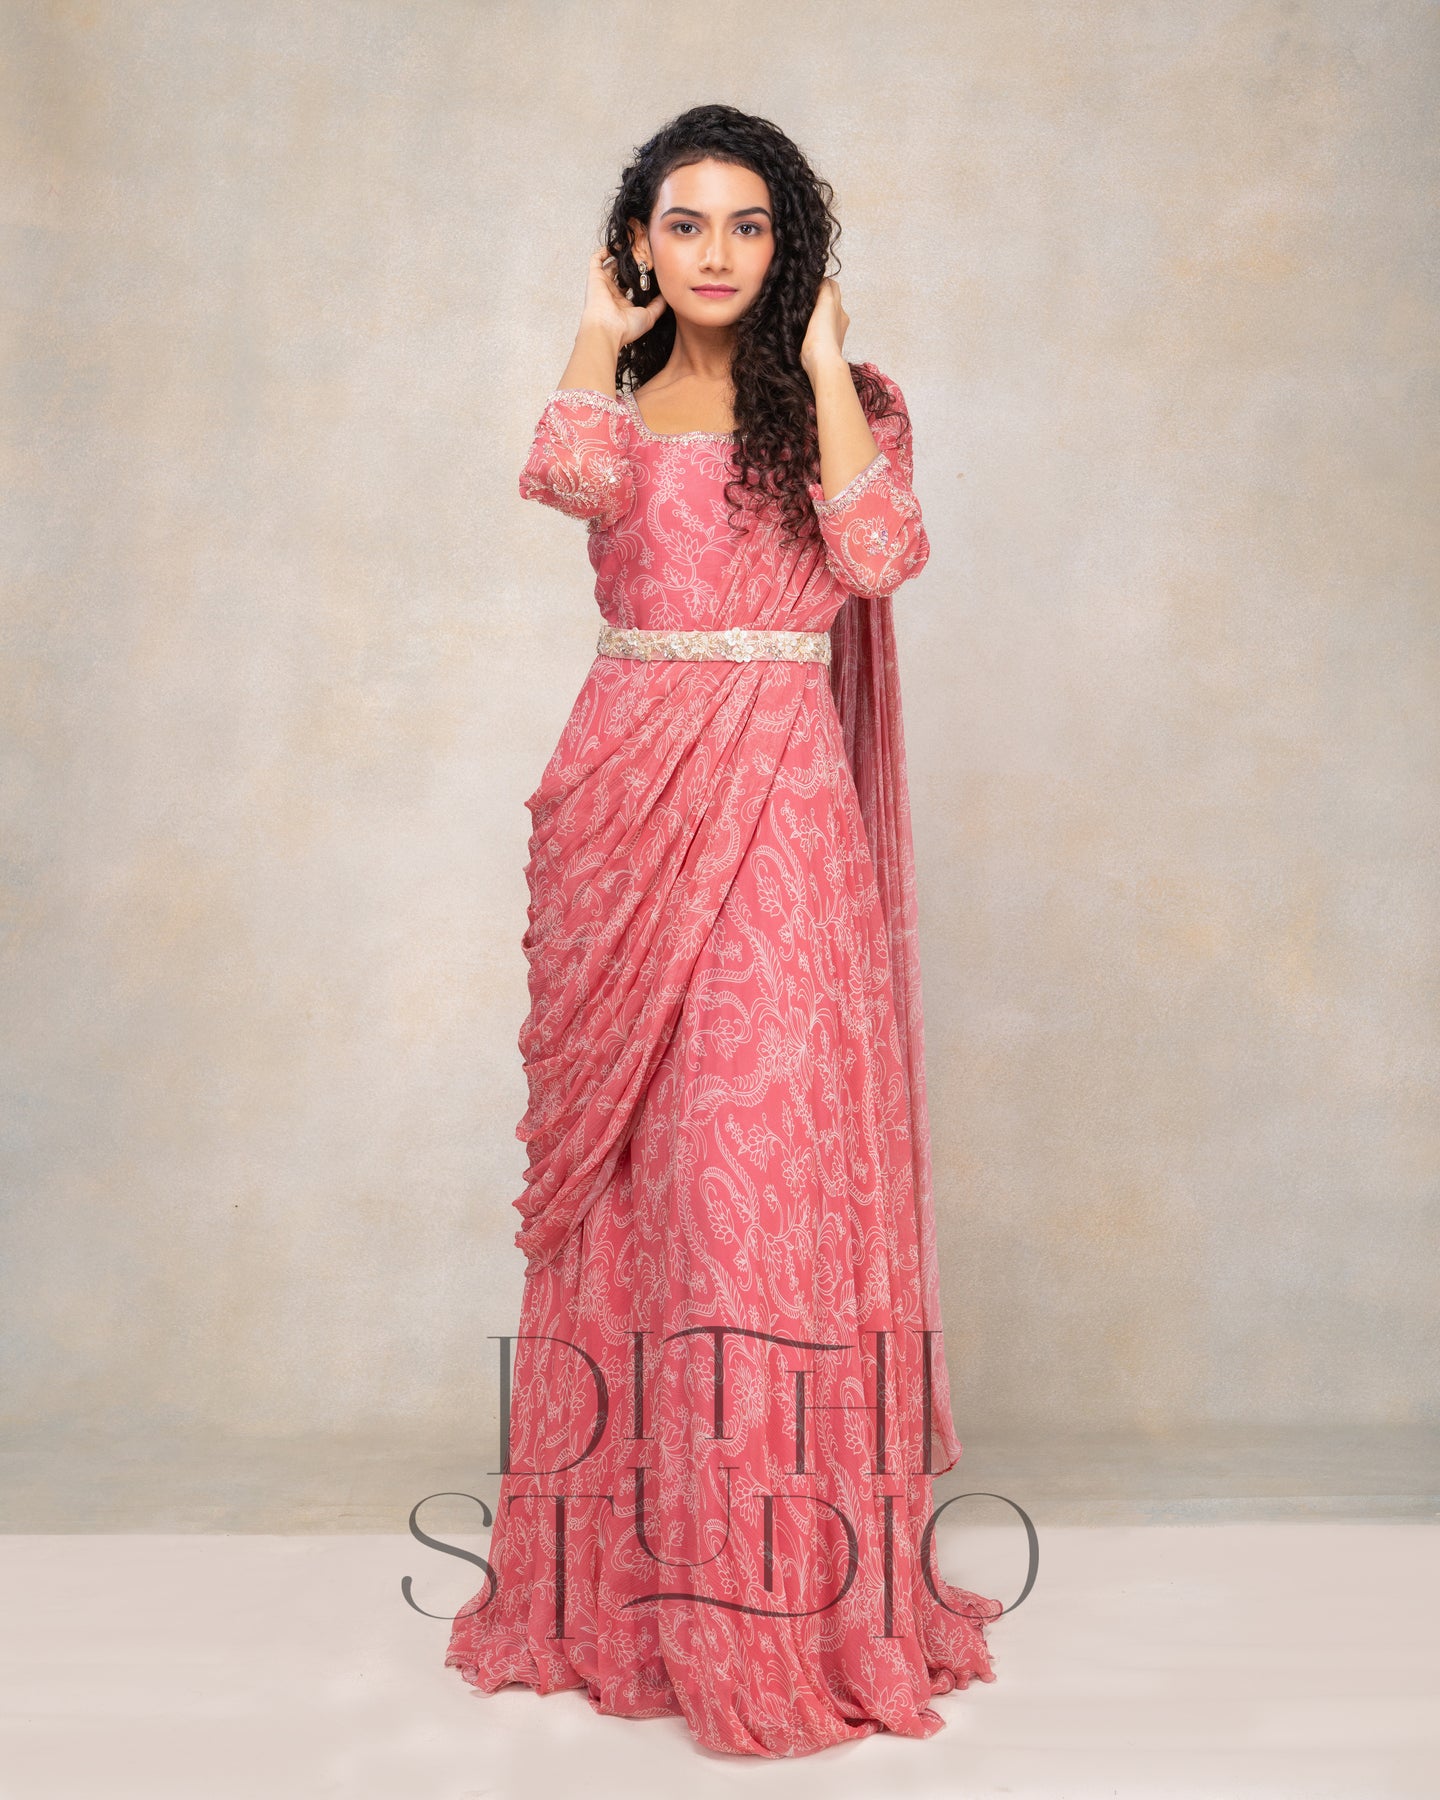 Pink Drape Dress with embroided belt